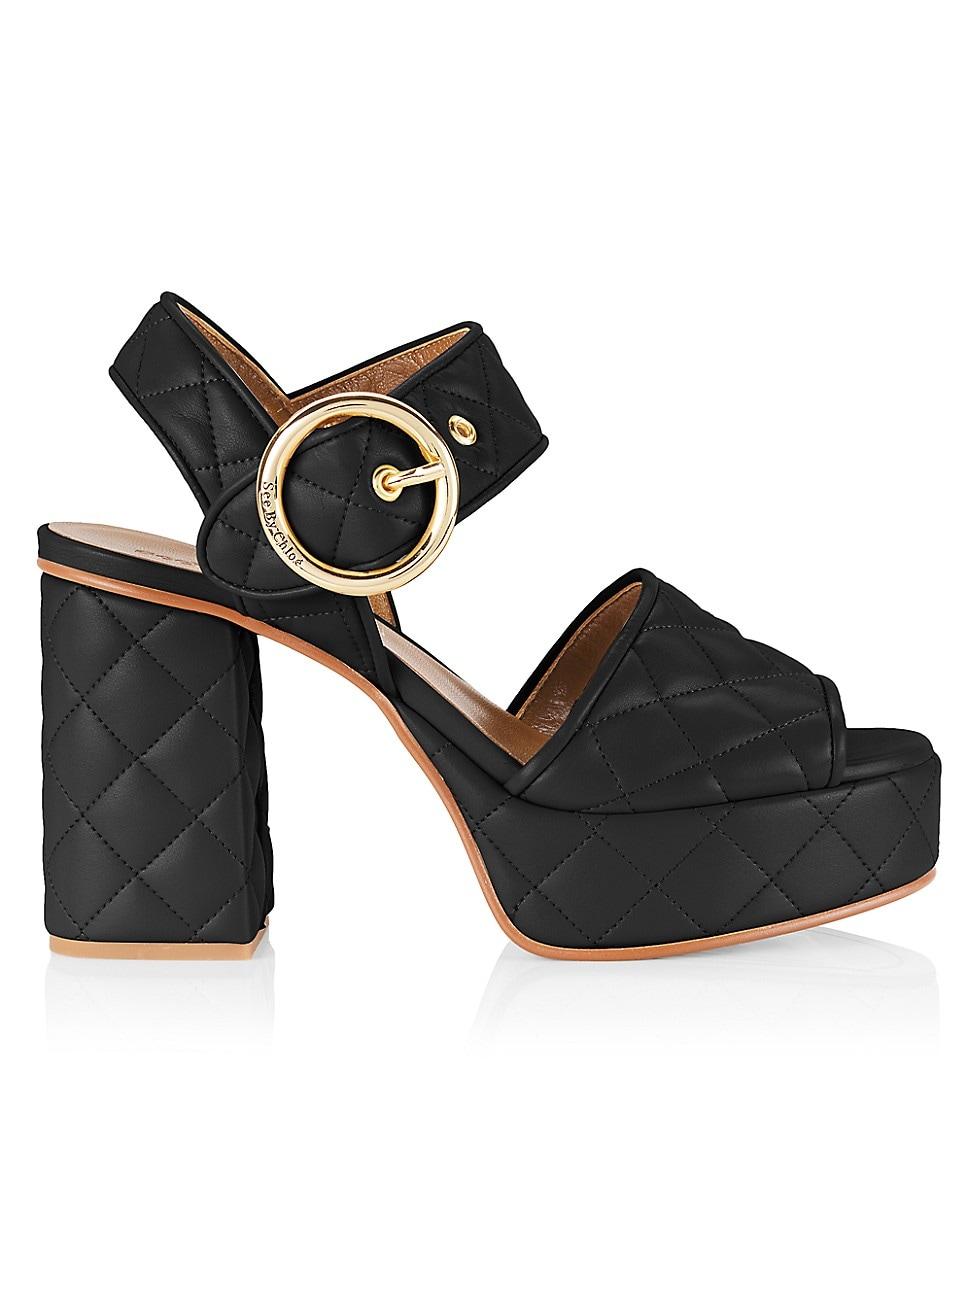 See By Chloé Jodie 110mm Quilted Leather Platform Sandals in Black | Lyst